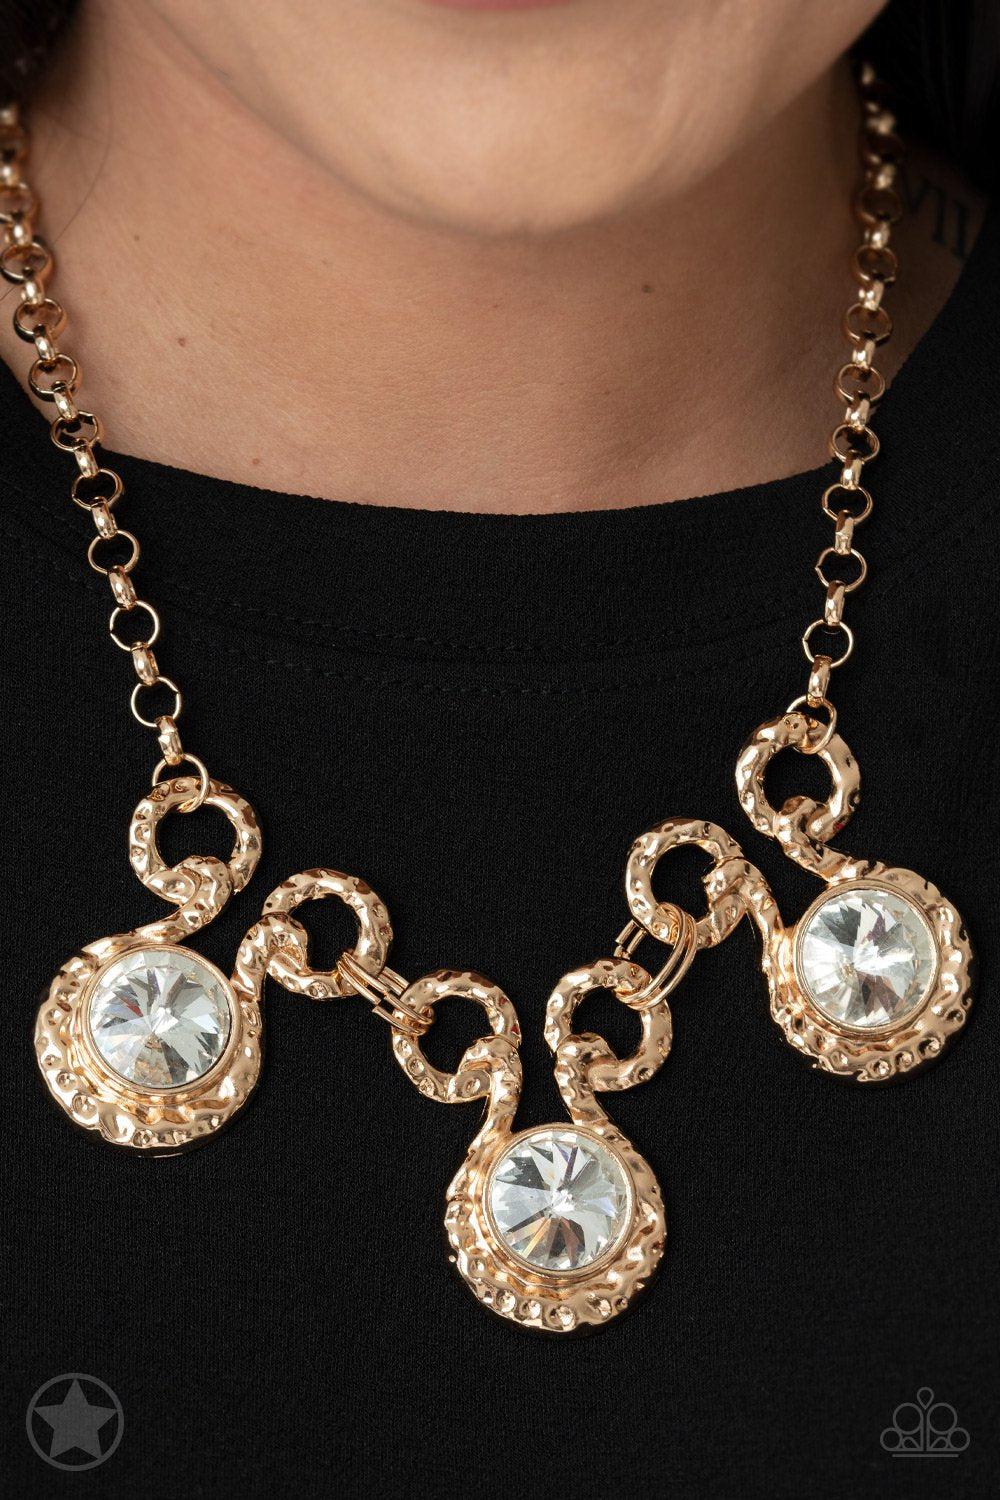 Hypnotized Gold and White Rhinestone Necklace and matching Earrings - Paparazzi Accessories - model -CarasShop.com - $5 Jewelry by Cara Jewels